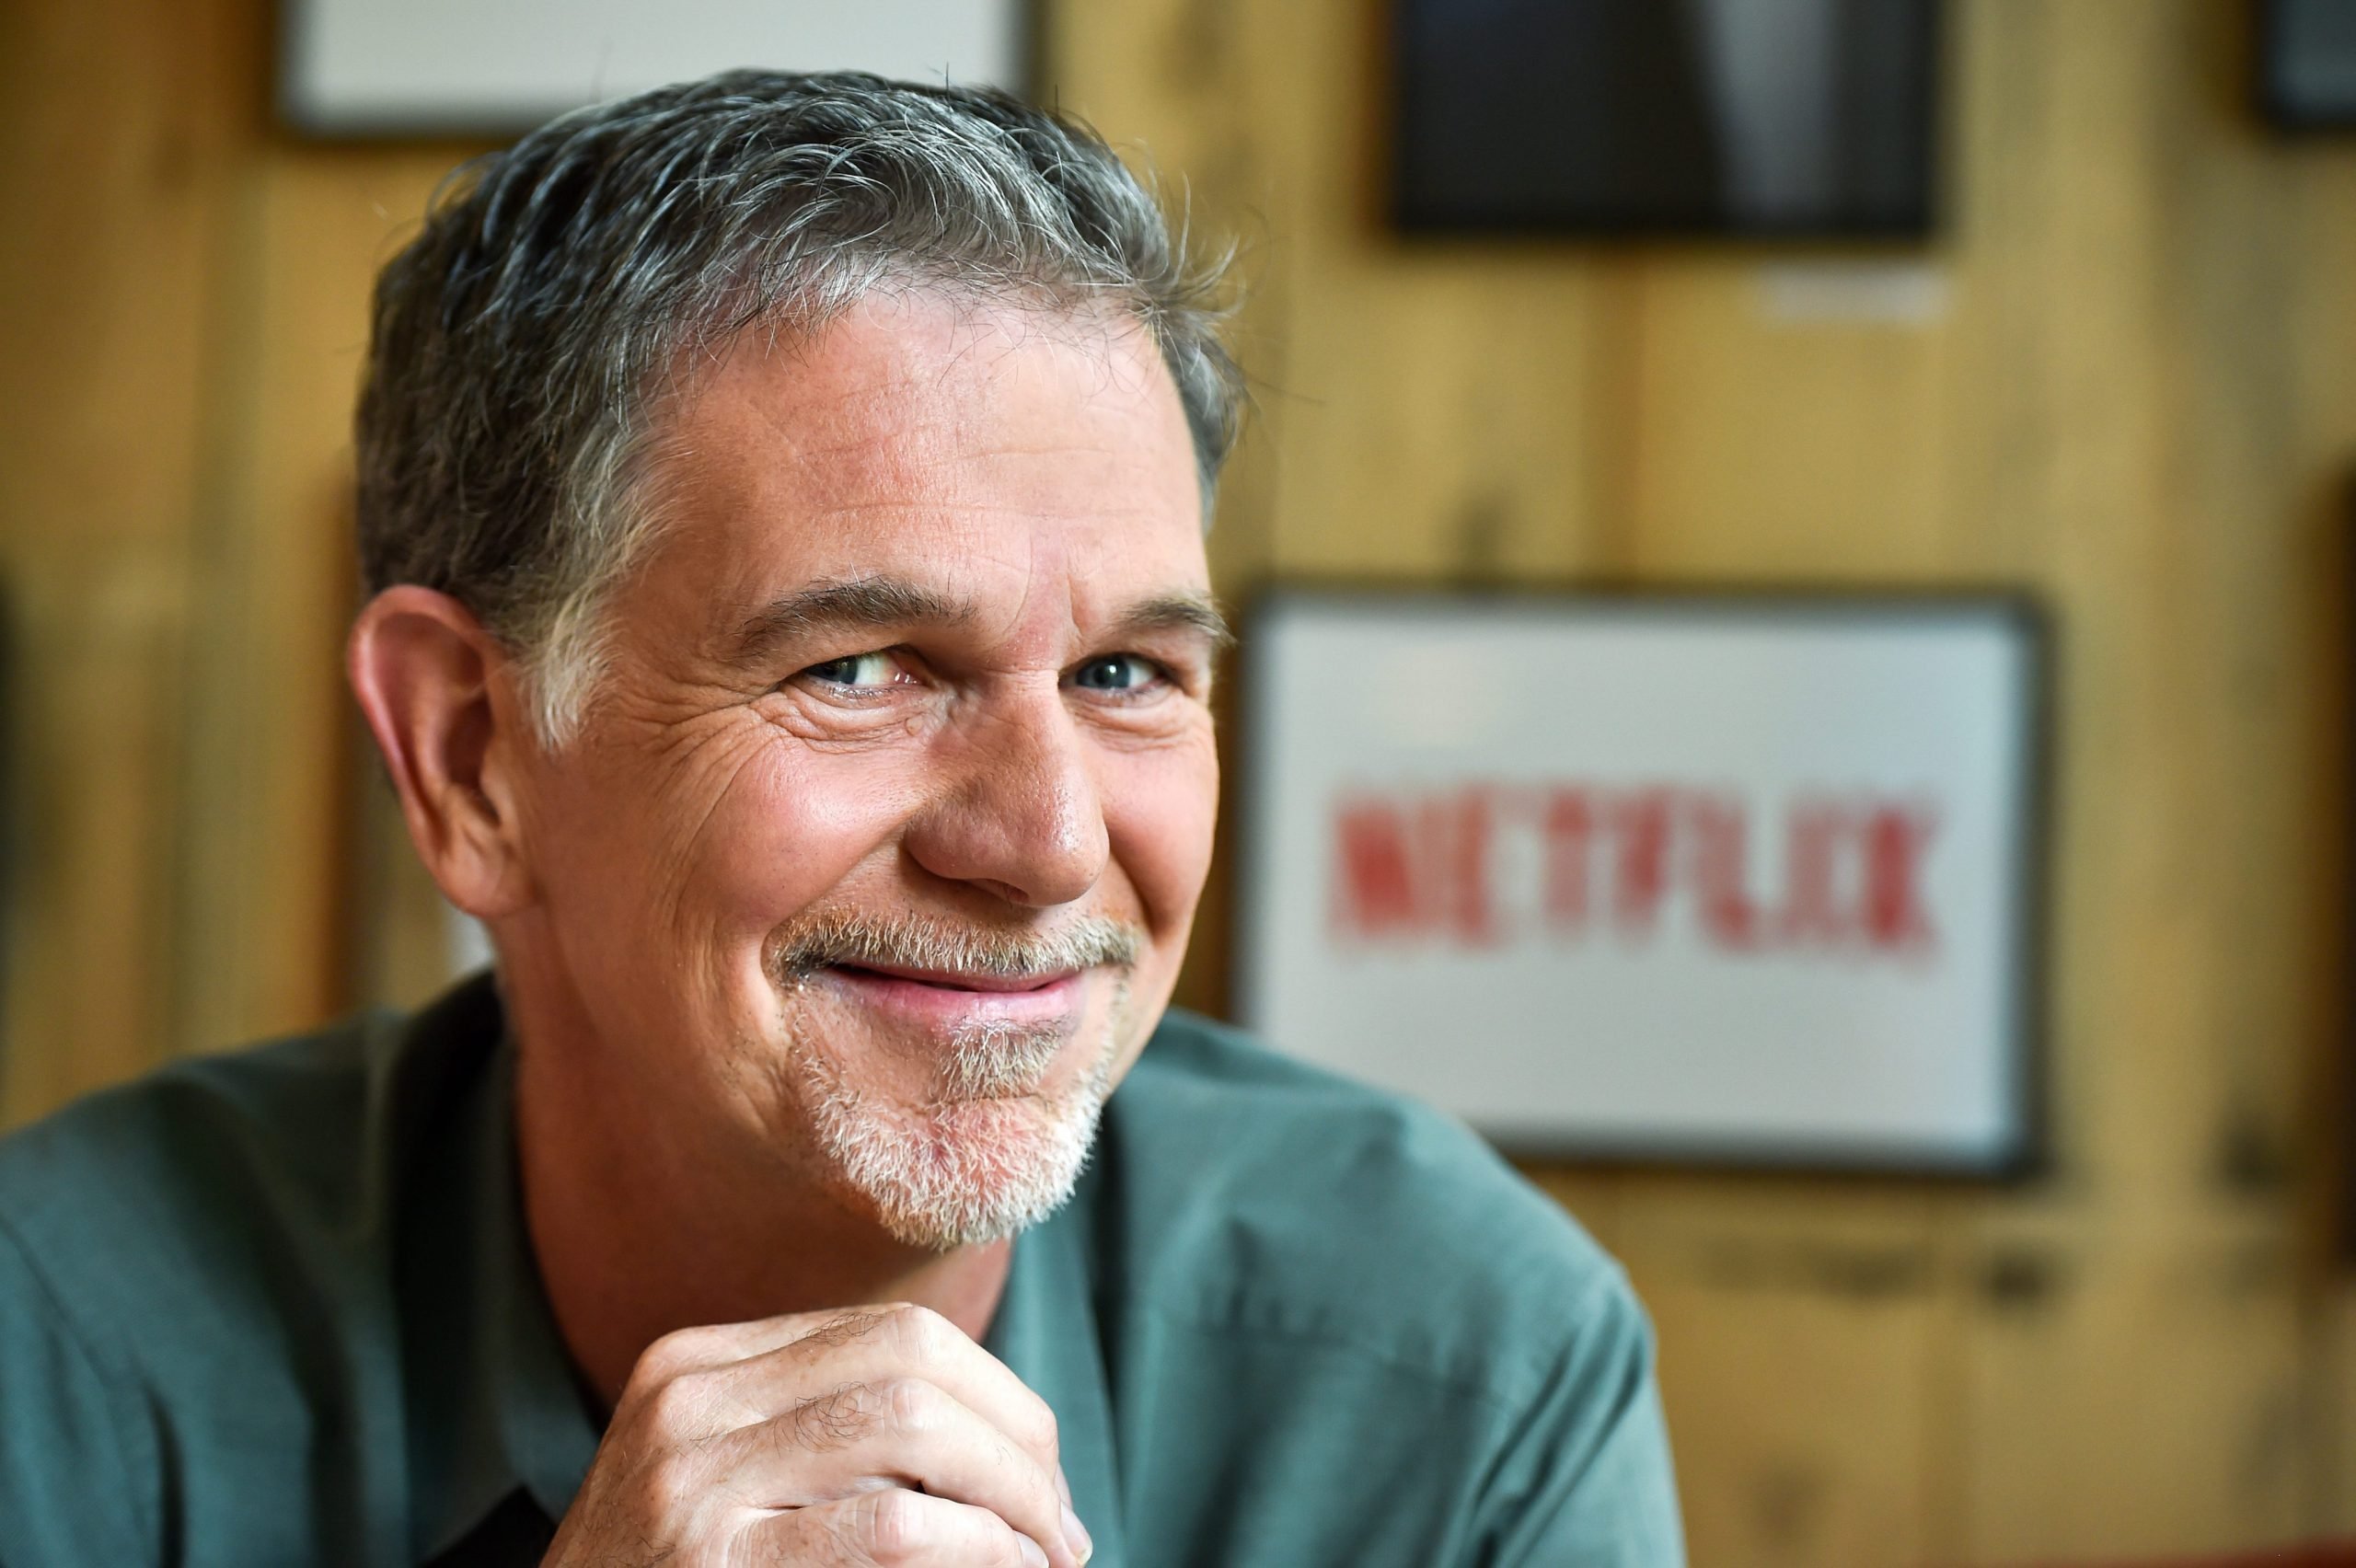 Reed Hastings, CEO and co-founder van Netflix